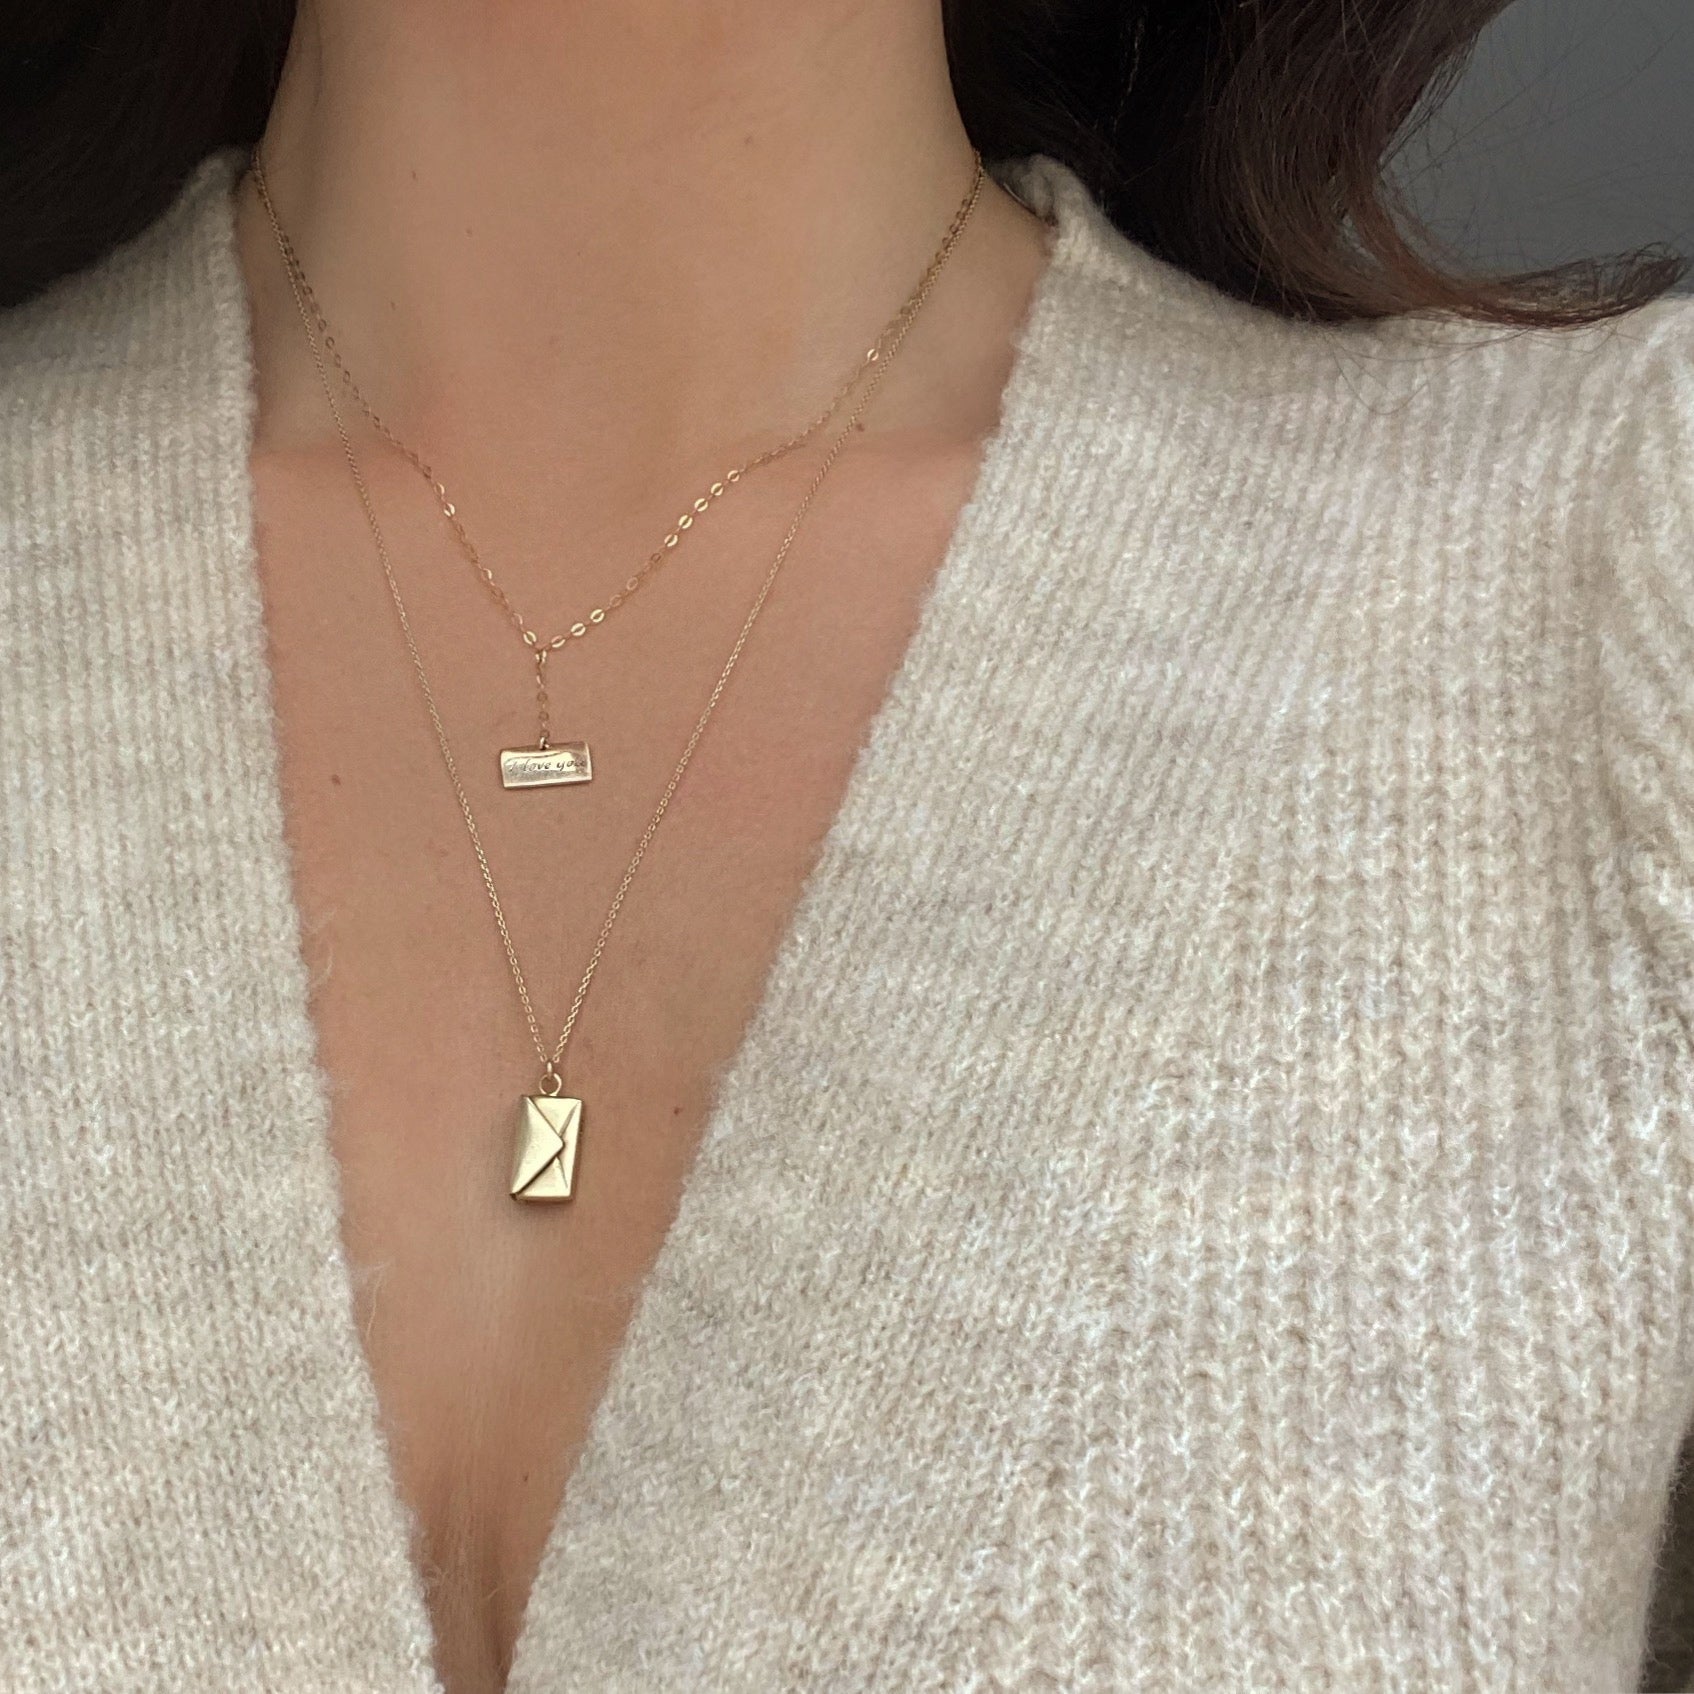 'I love you' Signature Envelope Necklace - 9ct Gold